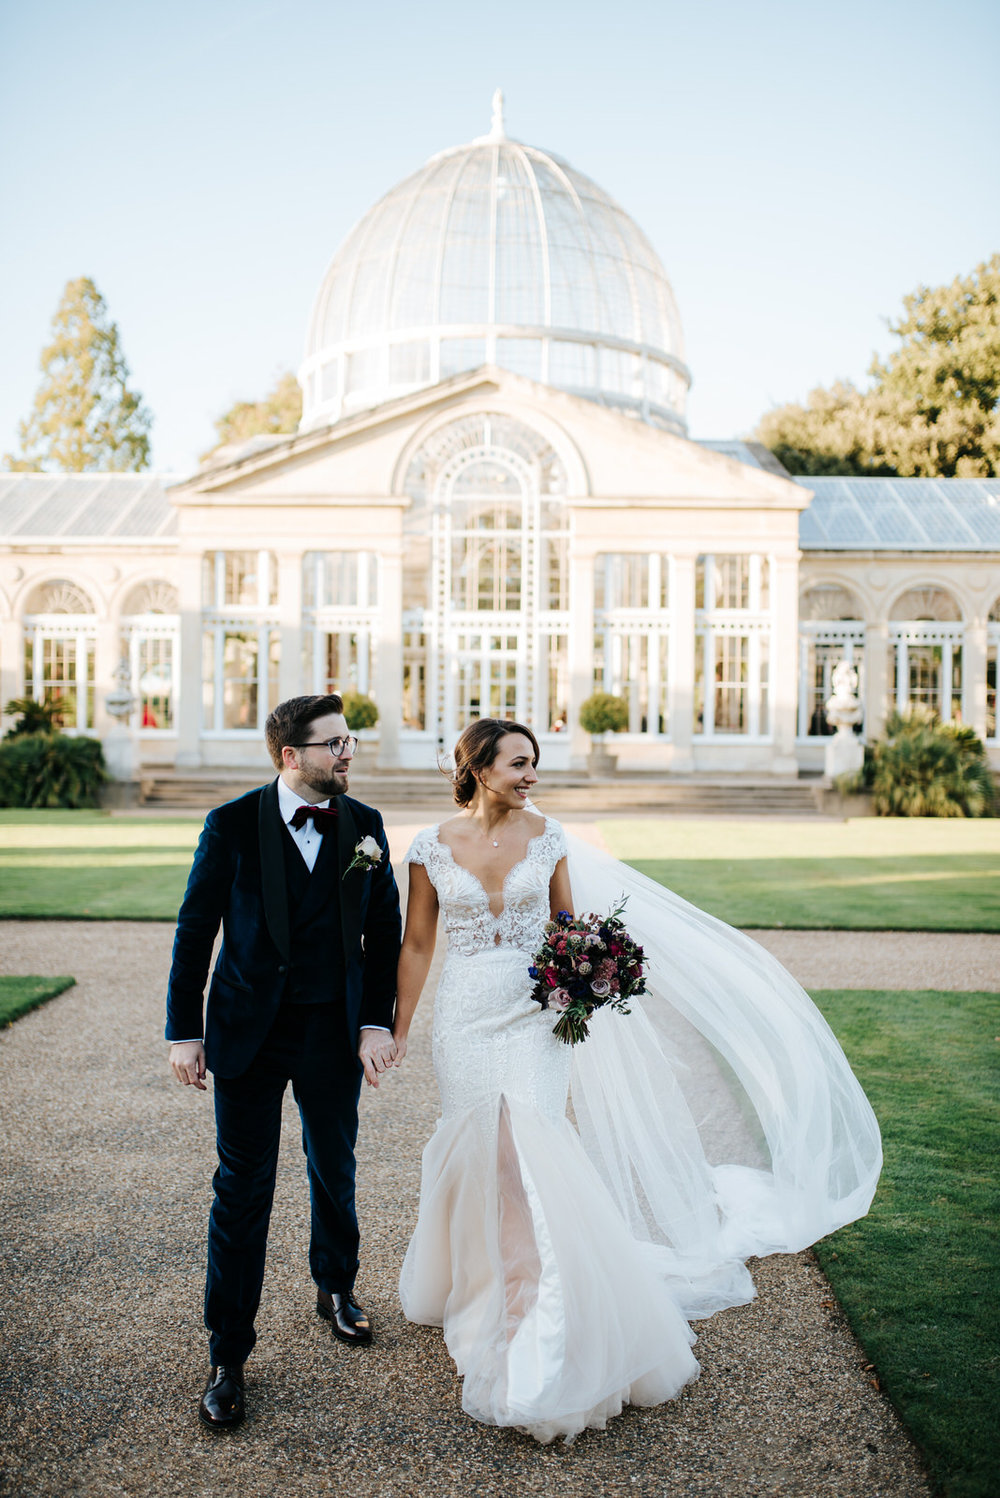 Bride and groom walk towards camera as great conservatory building towers from behind them